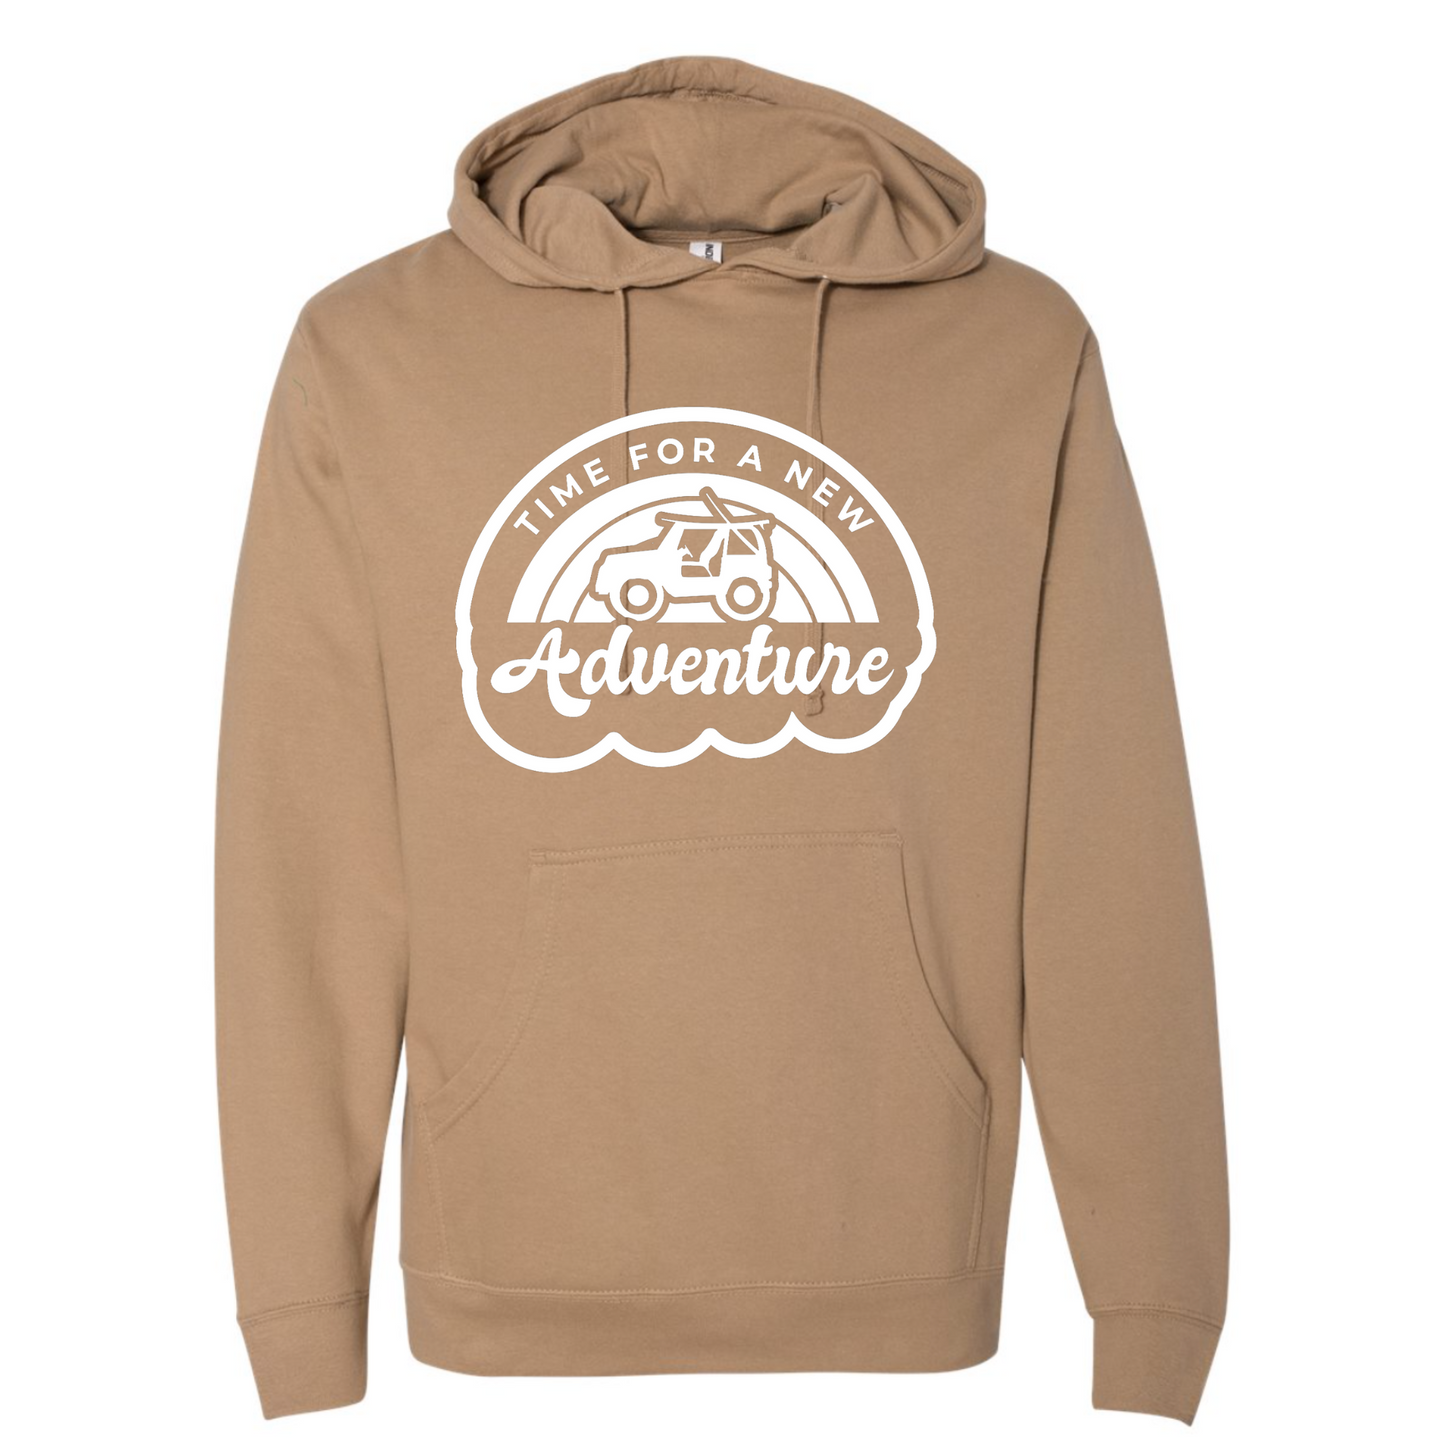 Time For A New Adventure Hooded Sweatshirt. Design is in a cloud bubble with time for a new adventure at the top curved with an off road vehicle in the middle with a rainbow behind it, and adventure below it. This the design in a white on the sandstone tan hoodie. This is the front view of the sweatshirt.